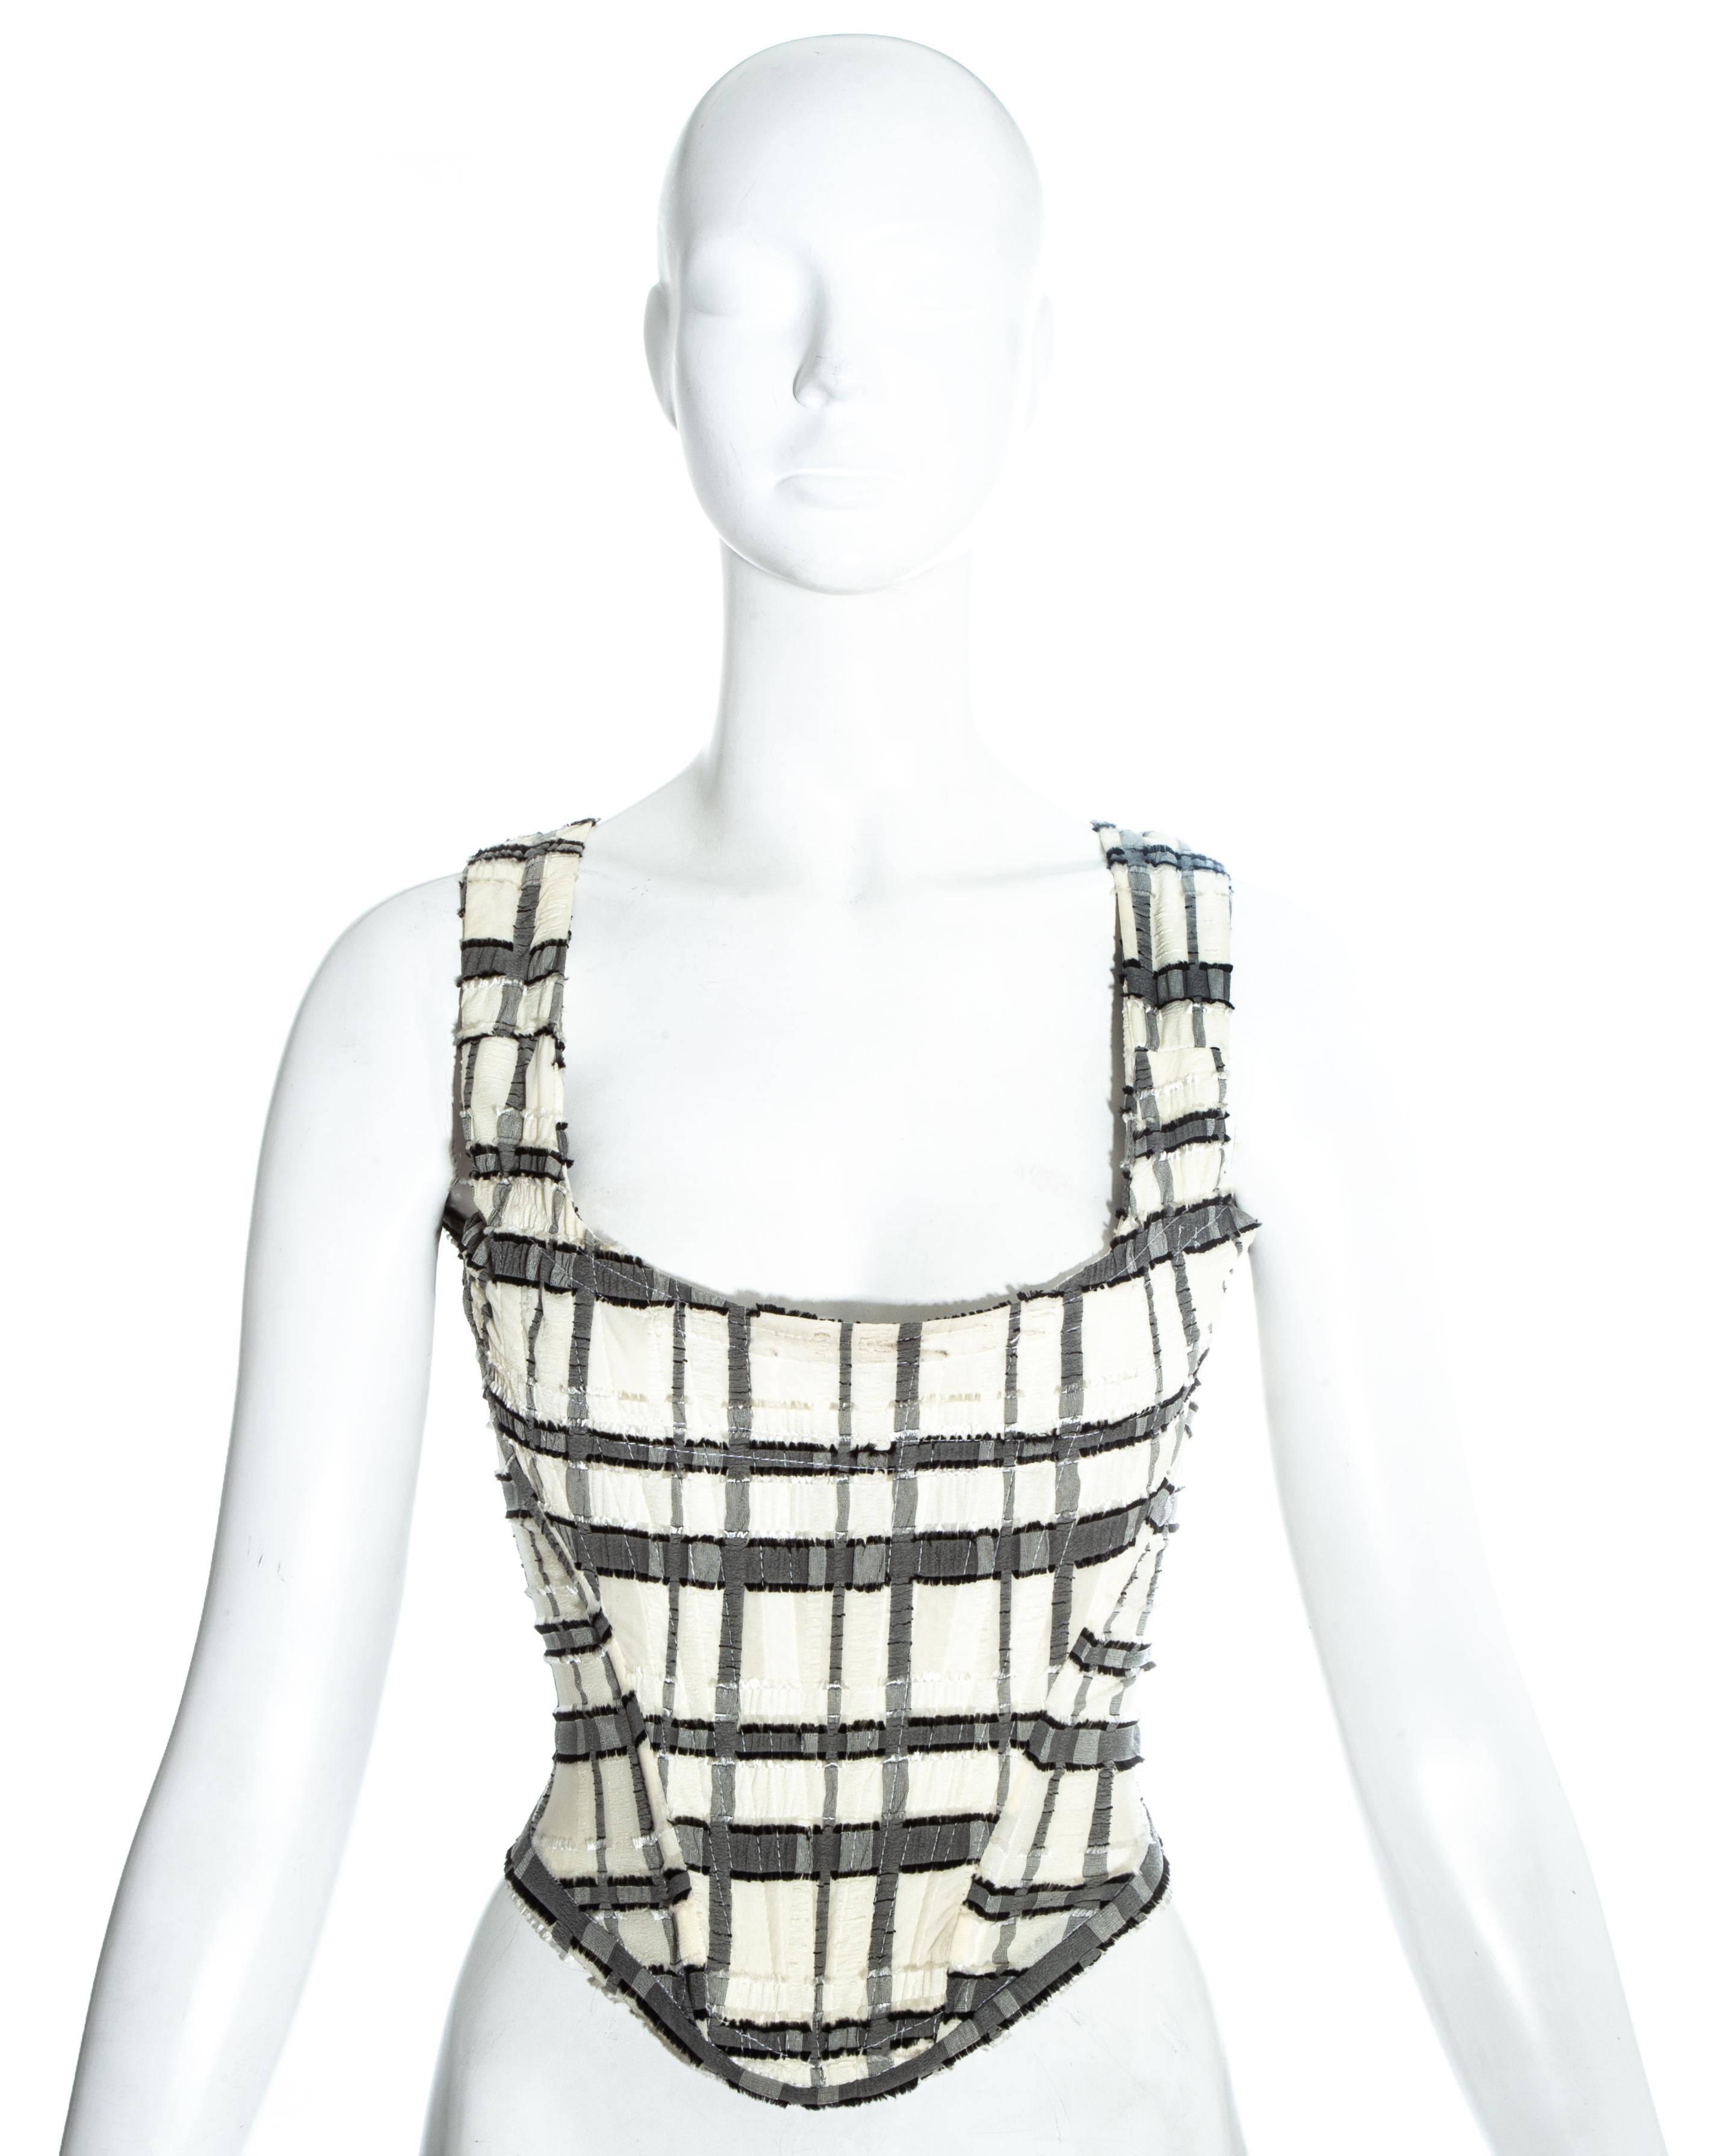 Vivienne Westwood white and grey checked corset - designed to cinch the waist and push the breasts up.

Spring-Summer 1994